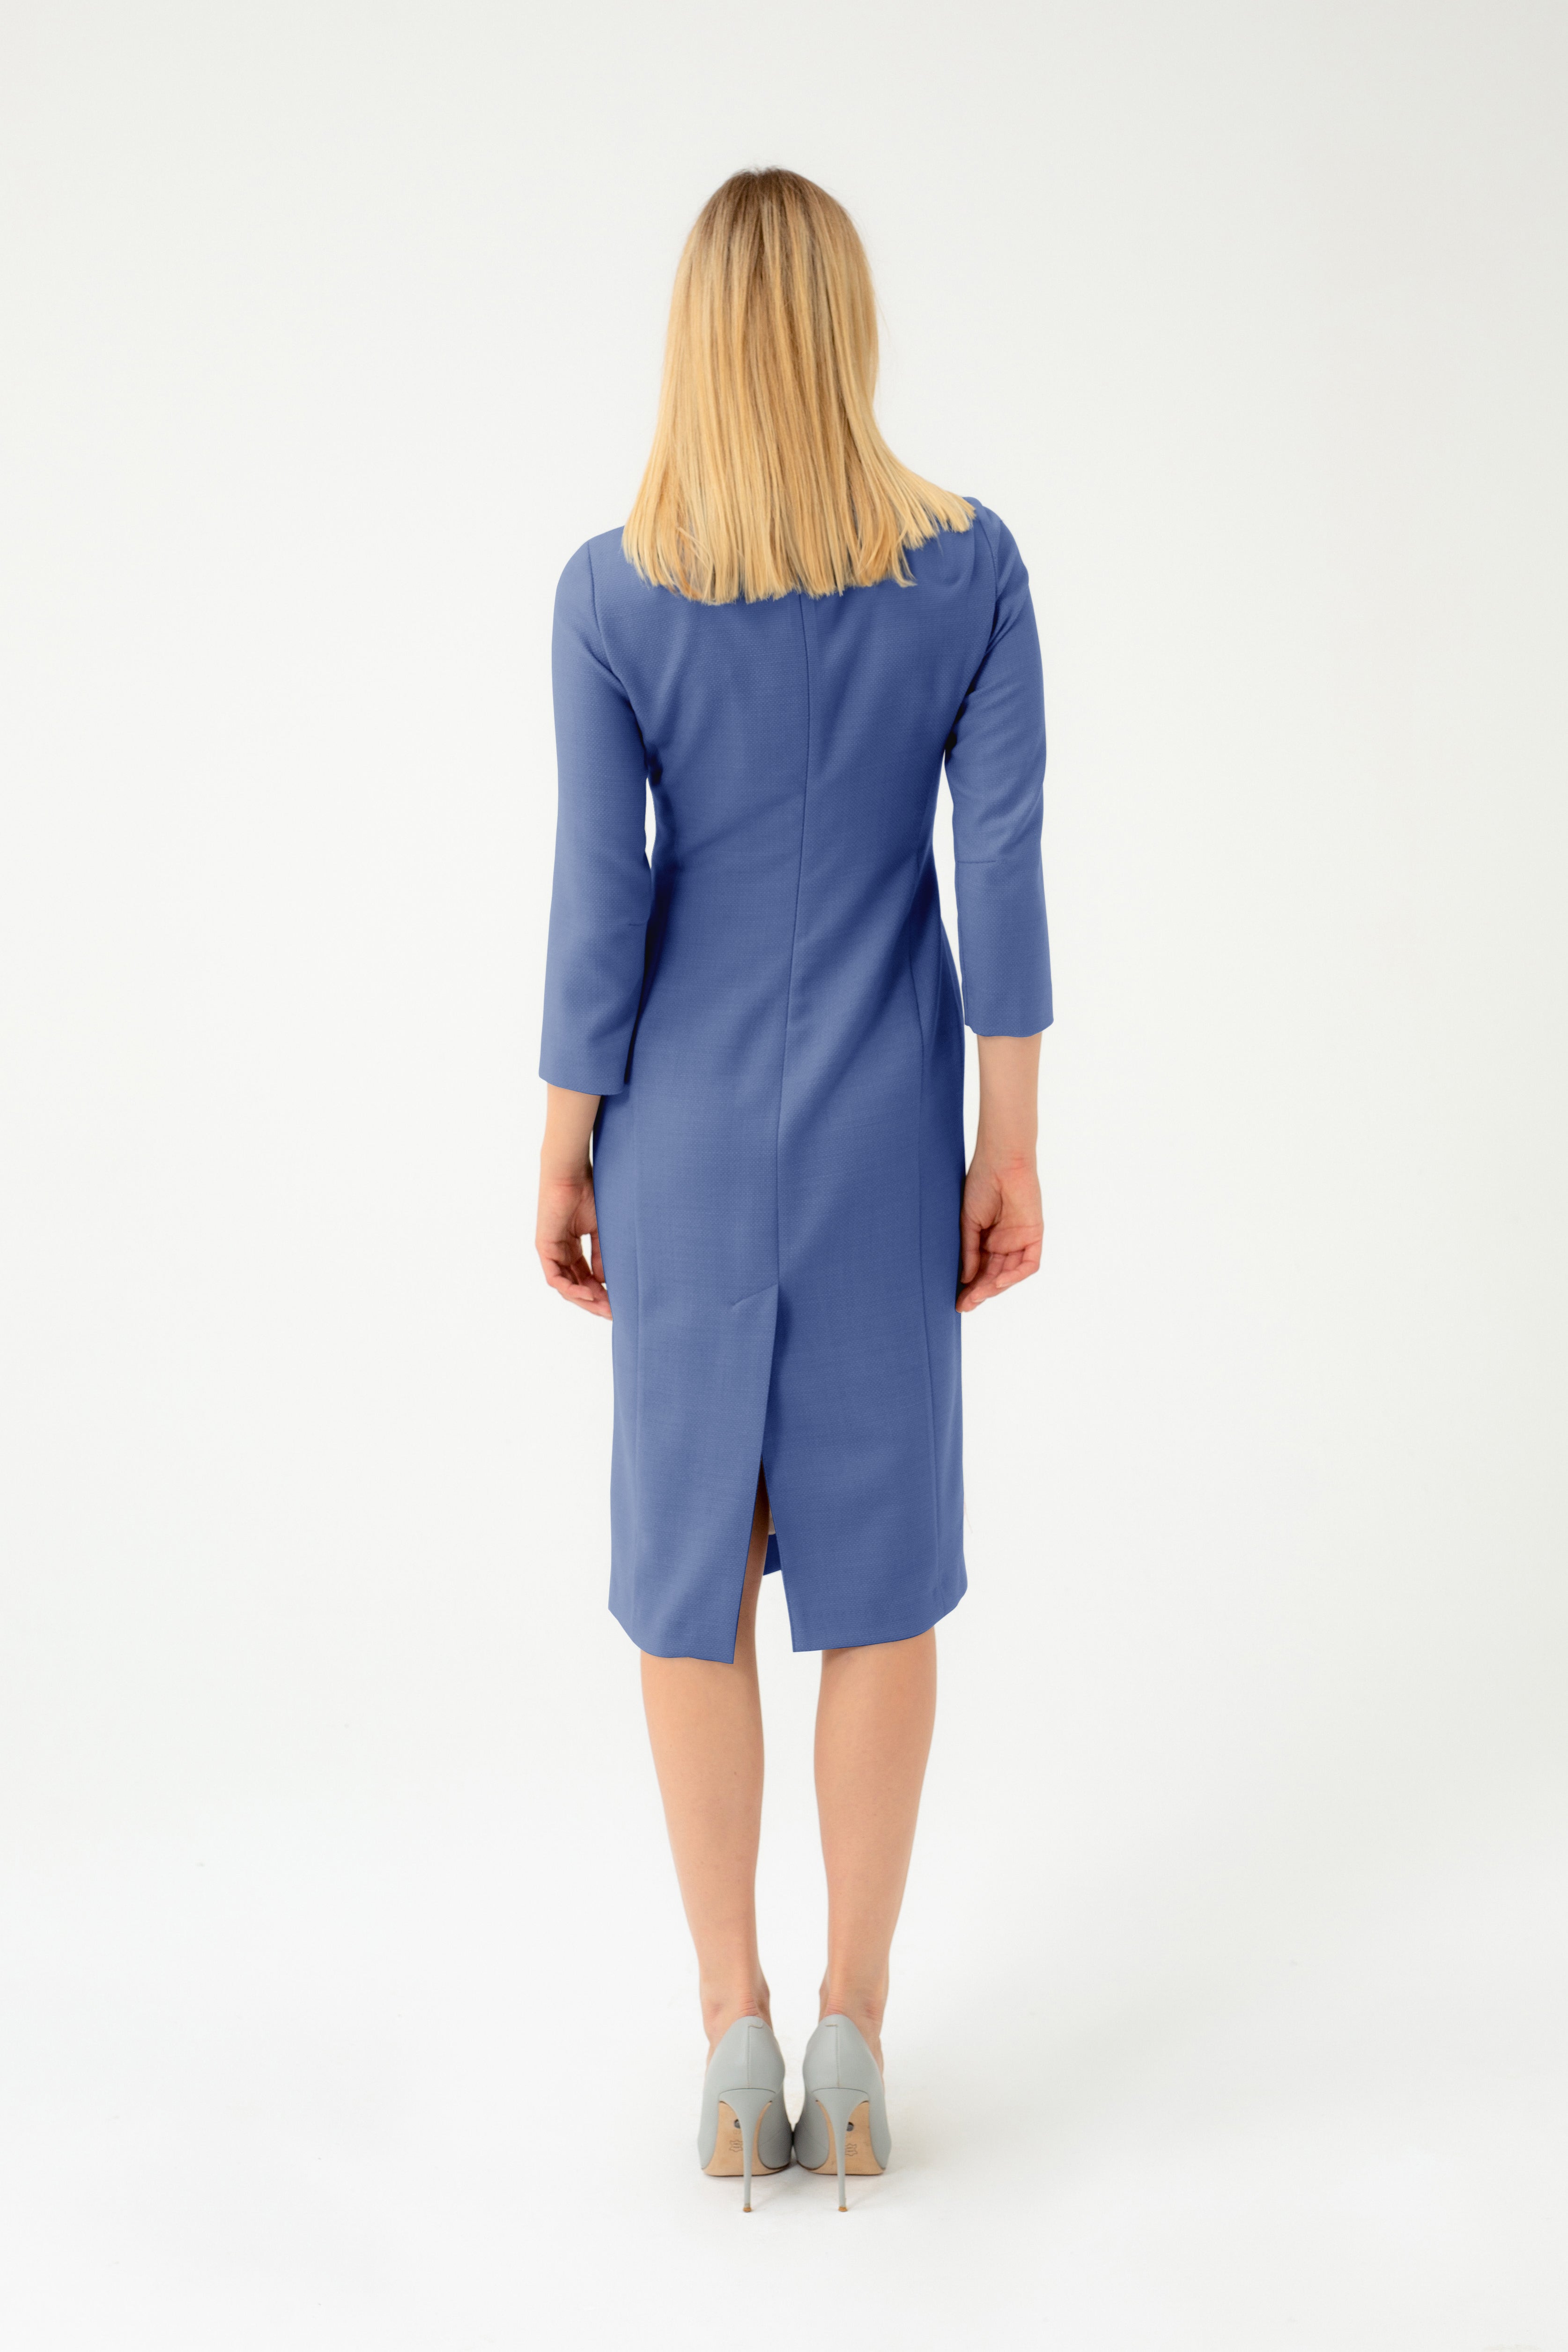 FITTED MIDI LENGTH BLUE DRESS